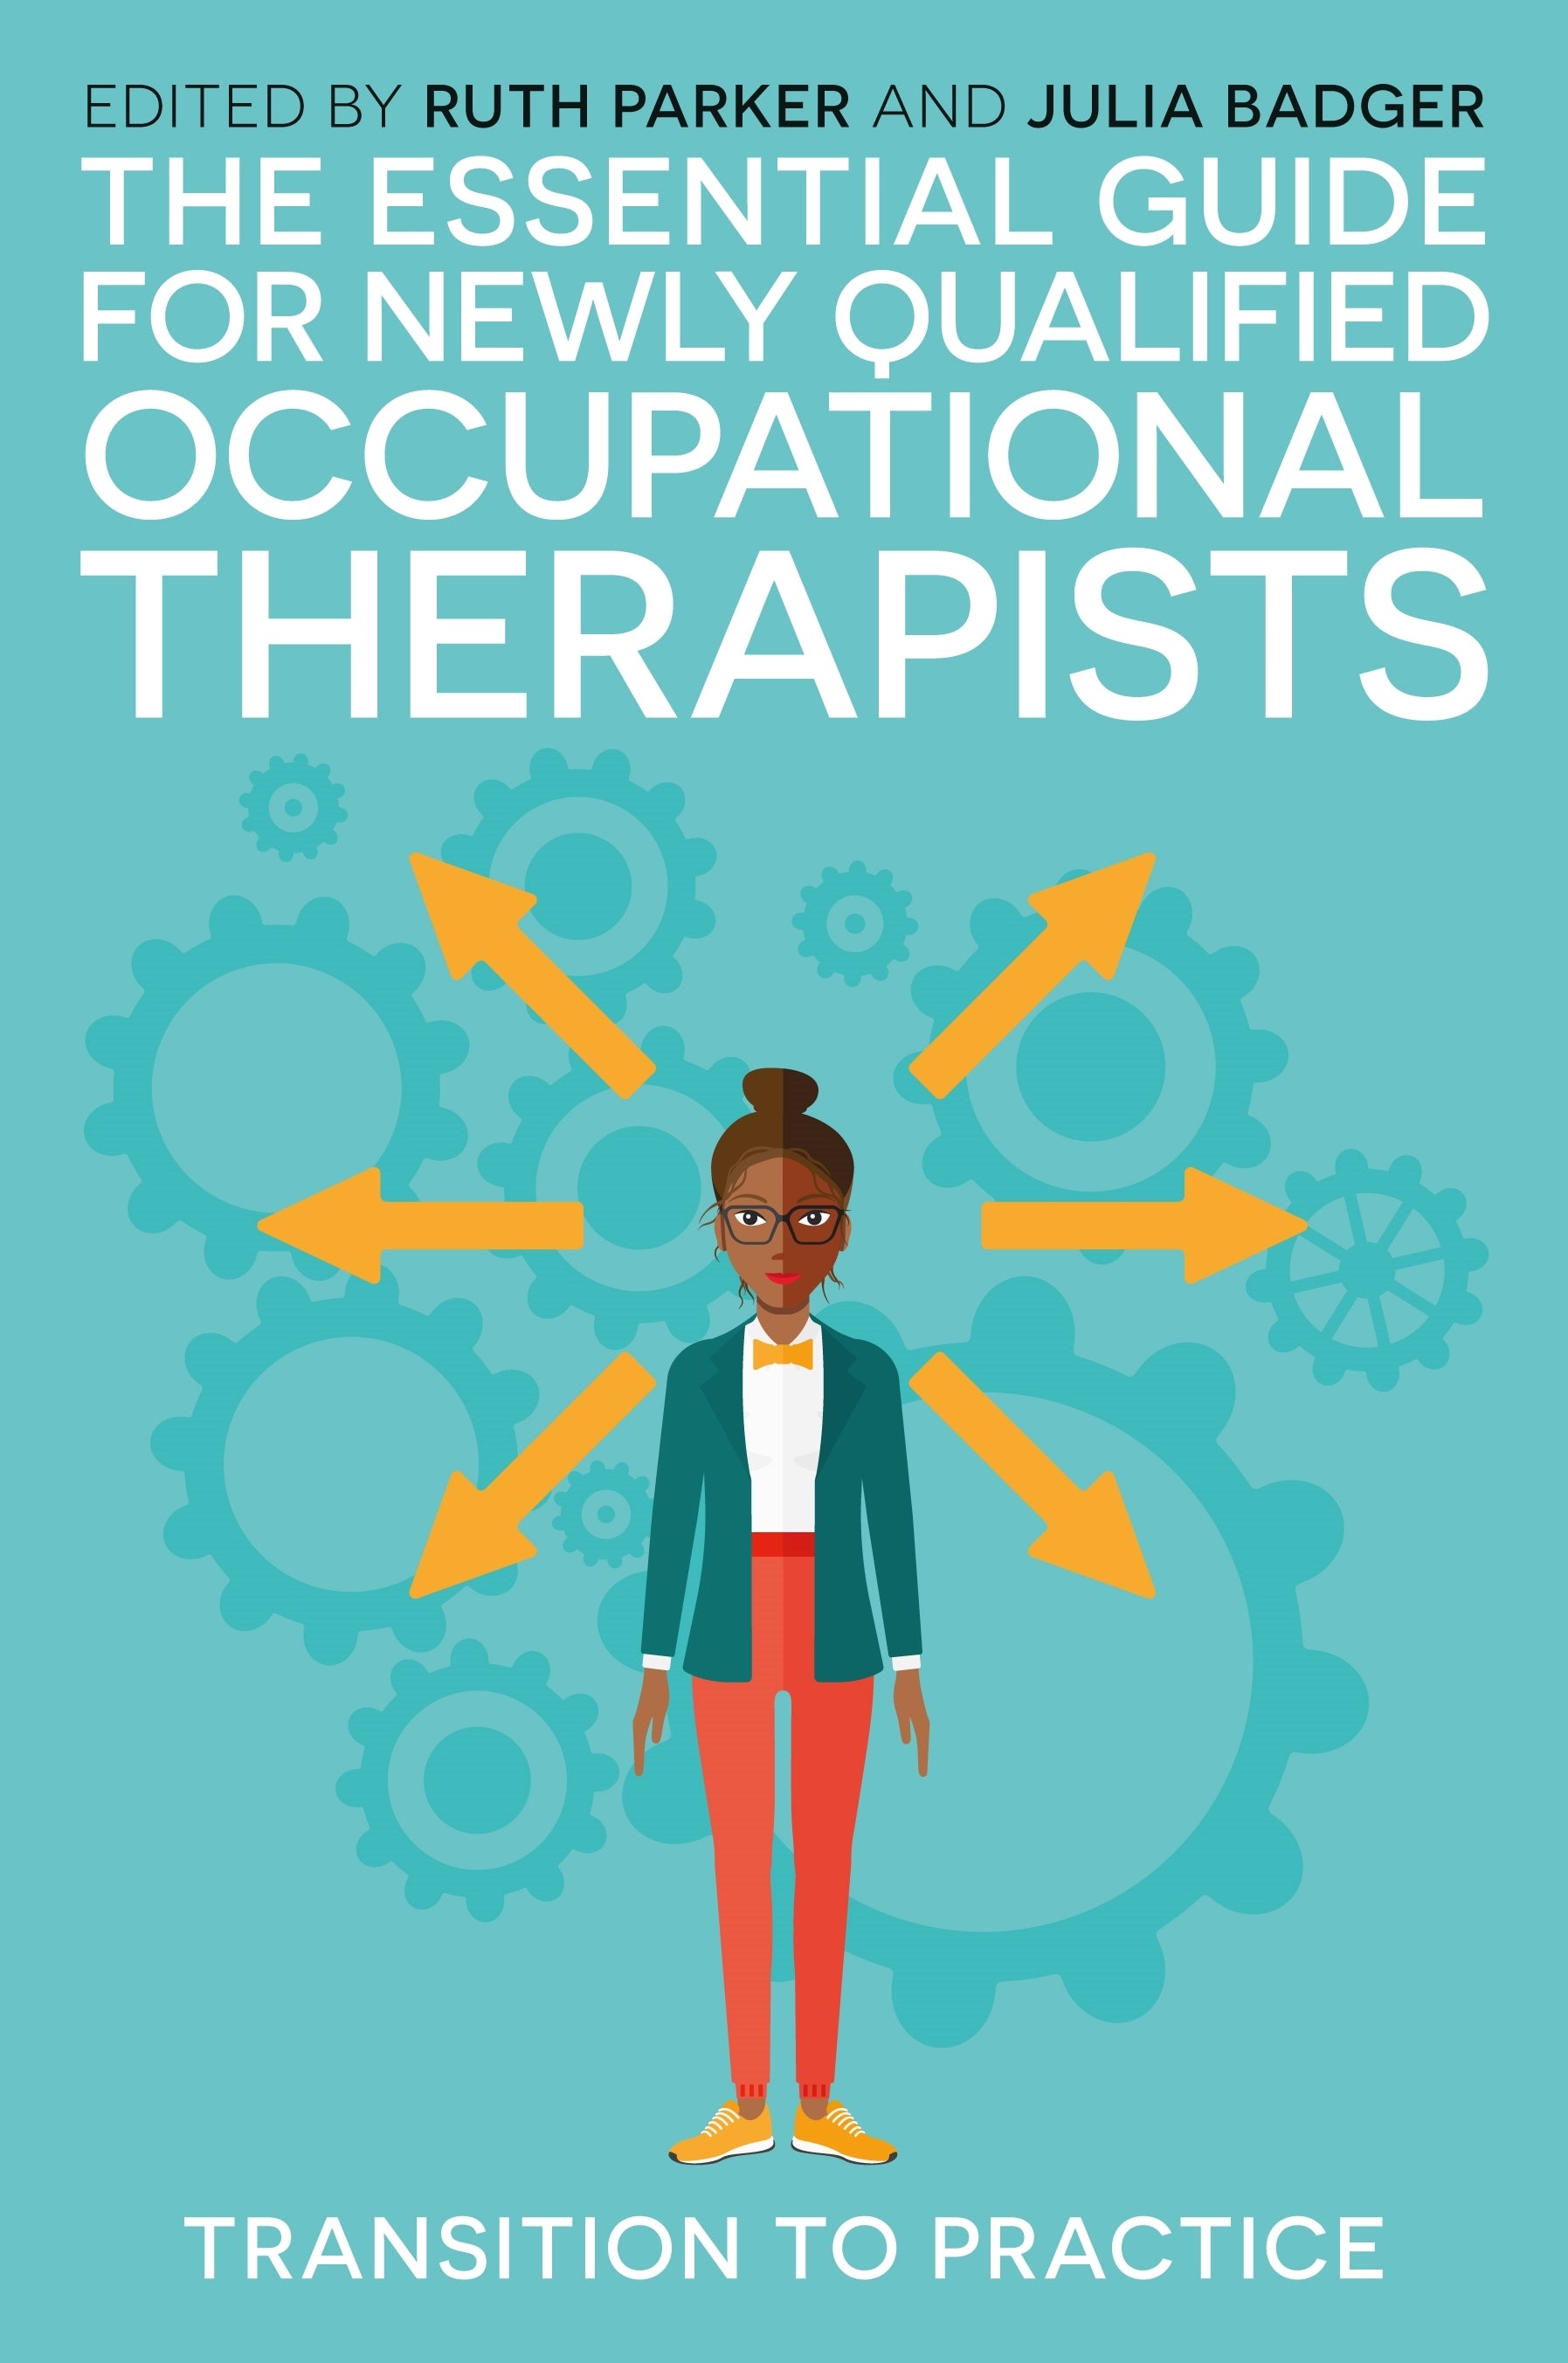 The Essential Guide for Newly Qualified Occupational Therapists by Ruth Parker, Julia Badger, Dr Theresa Baxter, Nick Pollard, No Author Listed